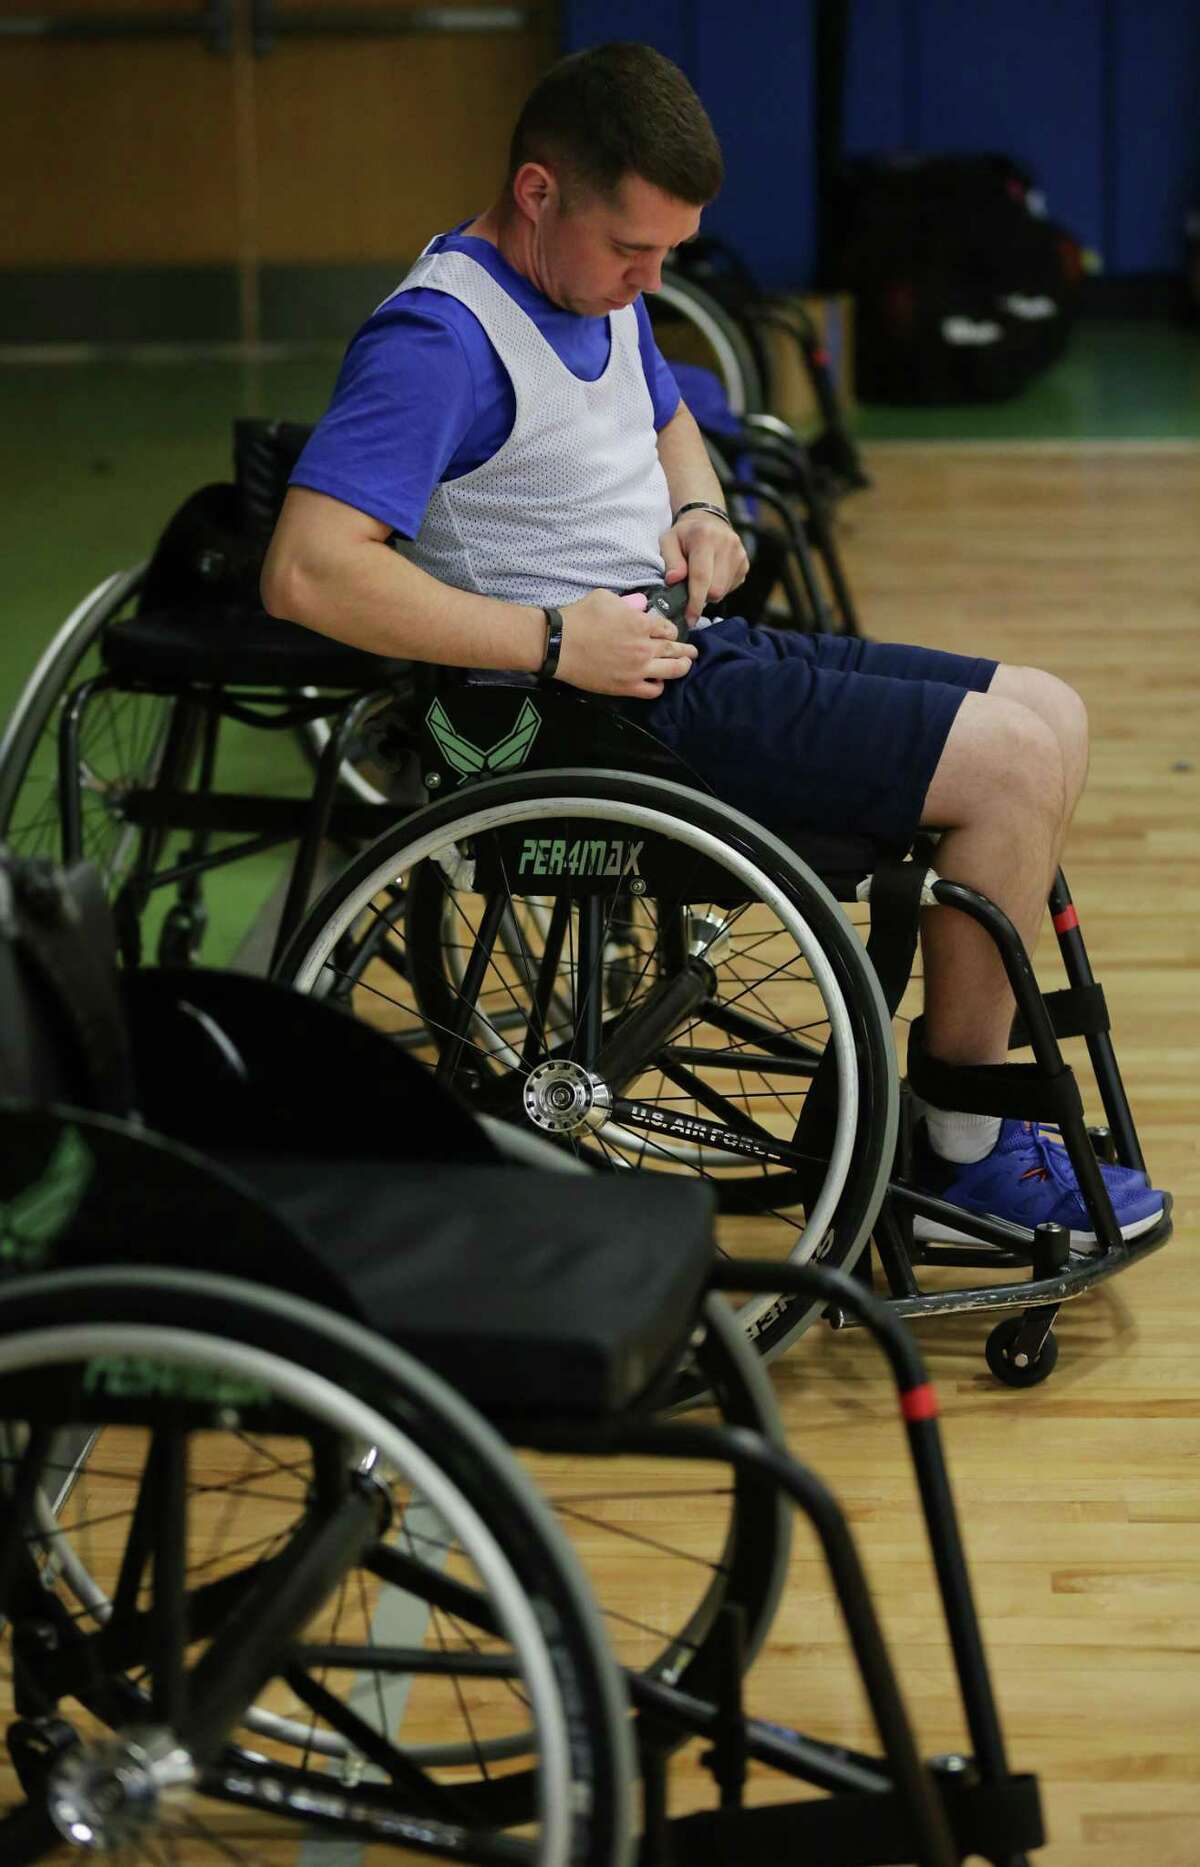 Brewer suffered PTSD Security Forces veteran Tech Sgt. Trevor Brewer, buckles in to play wheelchair basketball at the Air Force Wounded Warrior event at Joint Base San Antonio-Randolph, on Friday, Jan. 12, 2018.